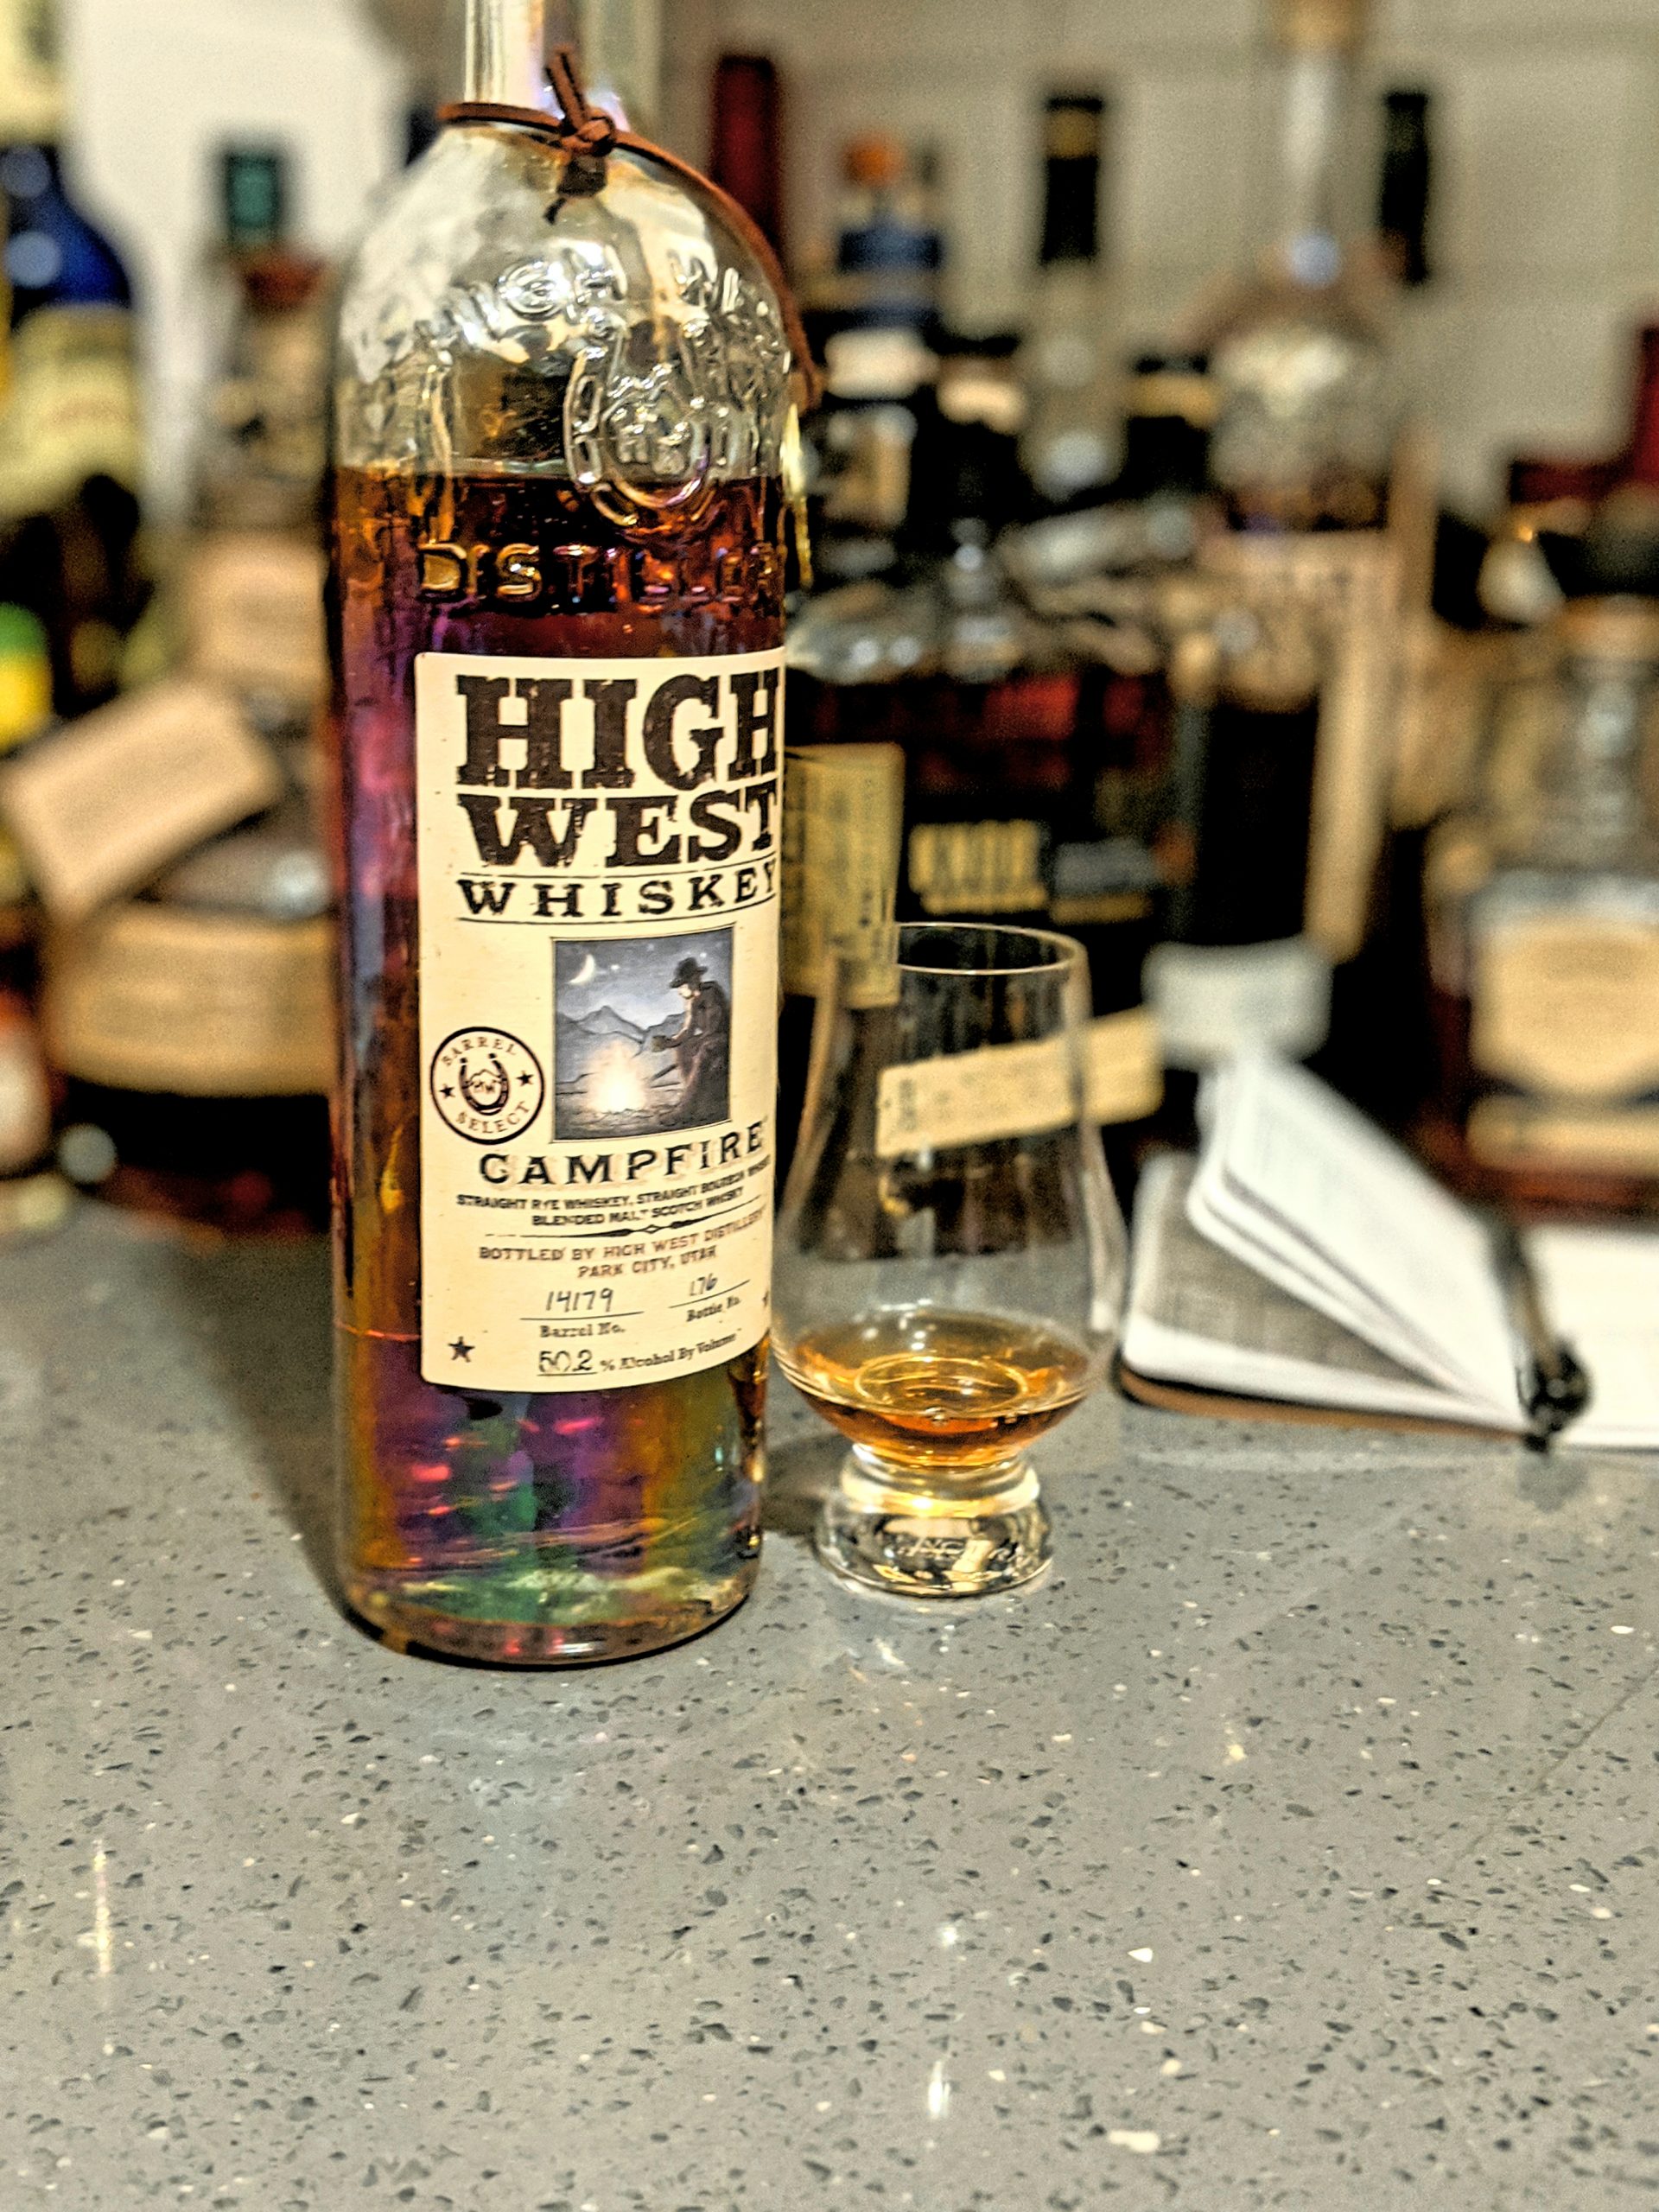 High West’s Single Barrel Campfire Whiskey finished in a Cognac Cask